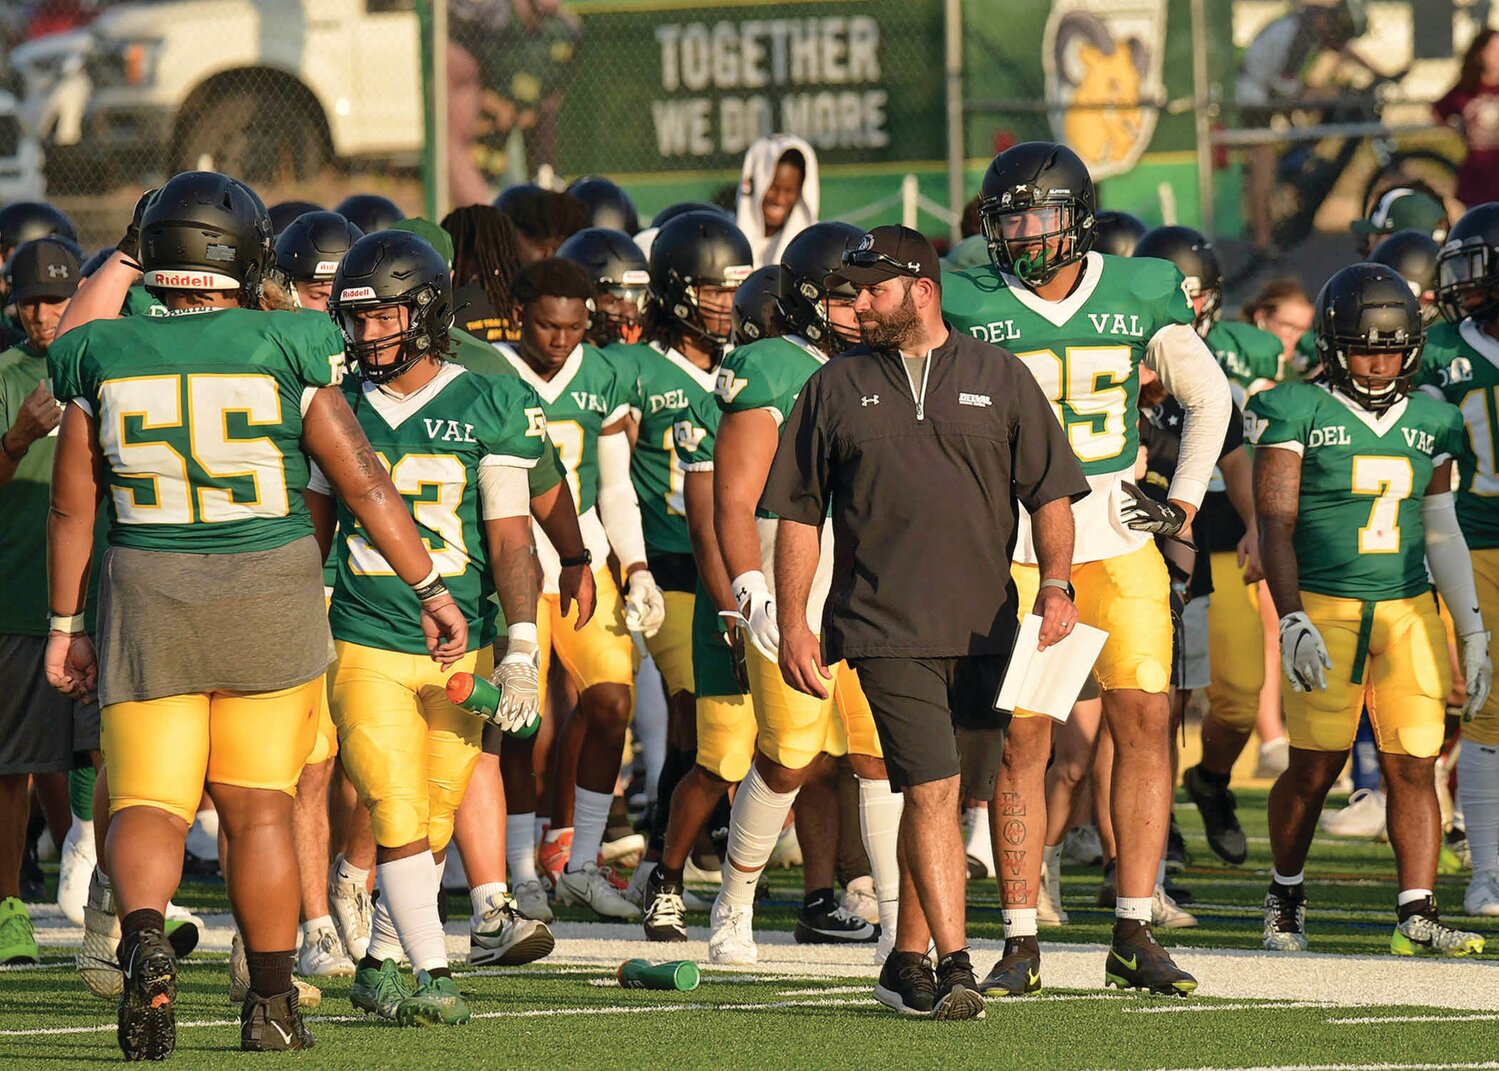 Mike Isgro leads the DelVal football team on the field as an assistant coach during the 2023 season.